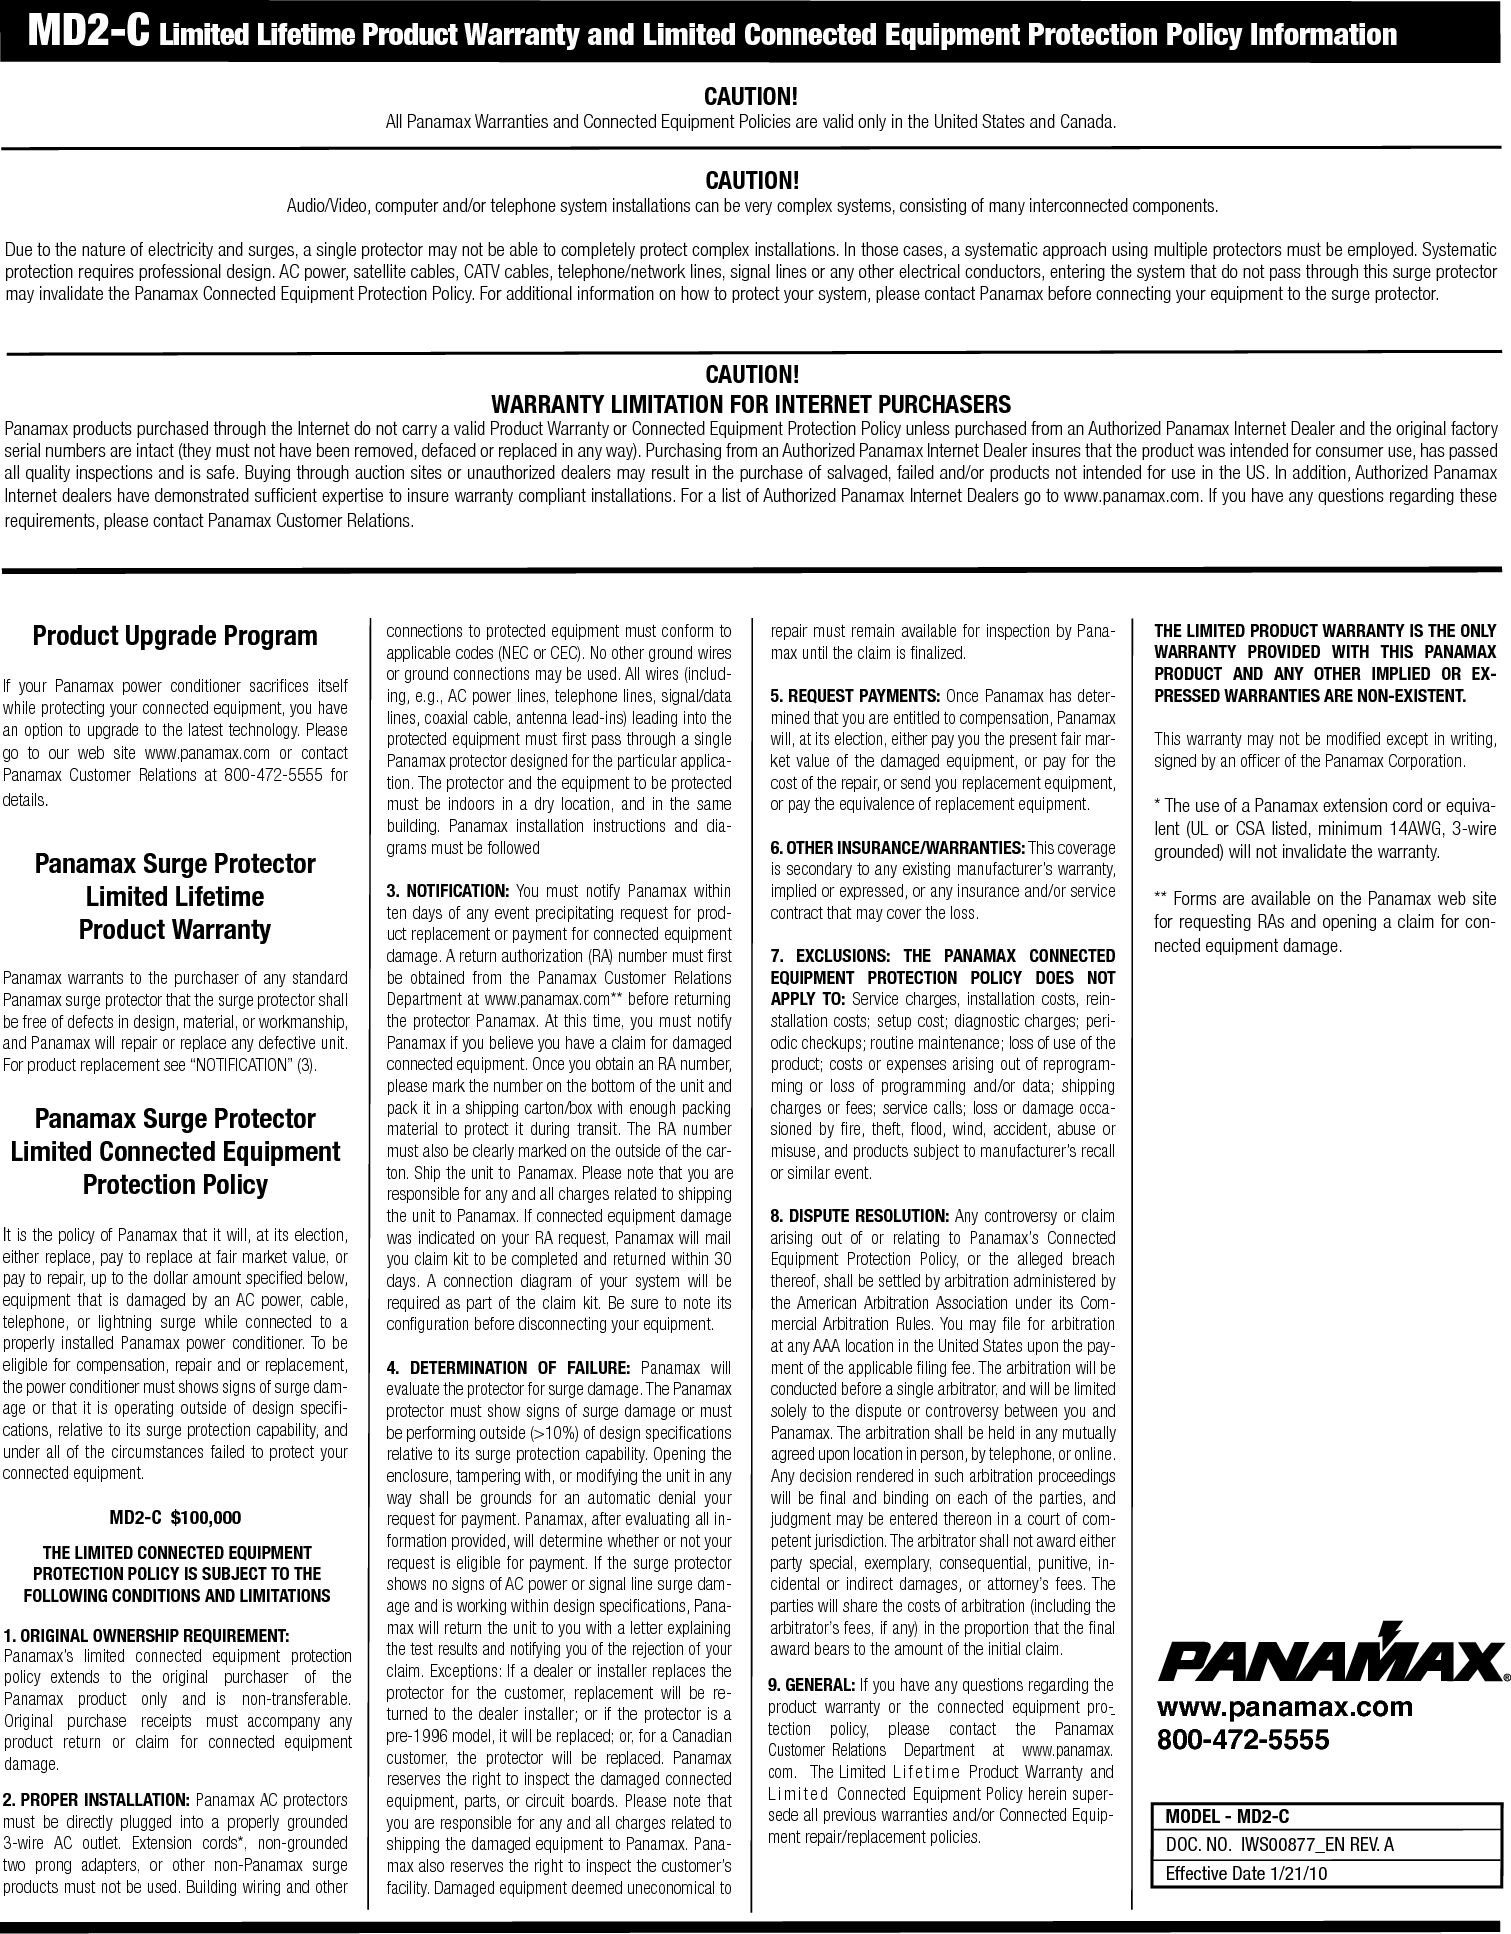 Page 2 of 2 - Pdf Md2-C Manual MD2-C-INS00877-A User